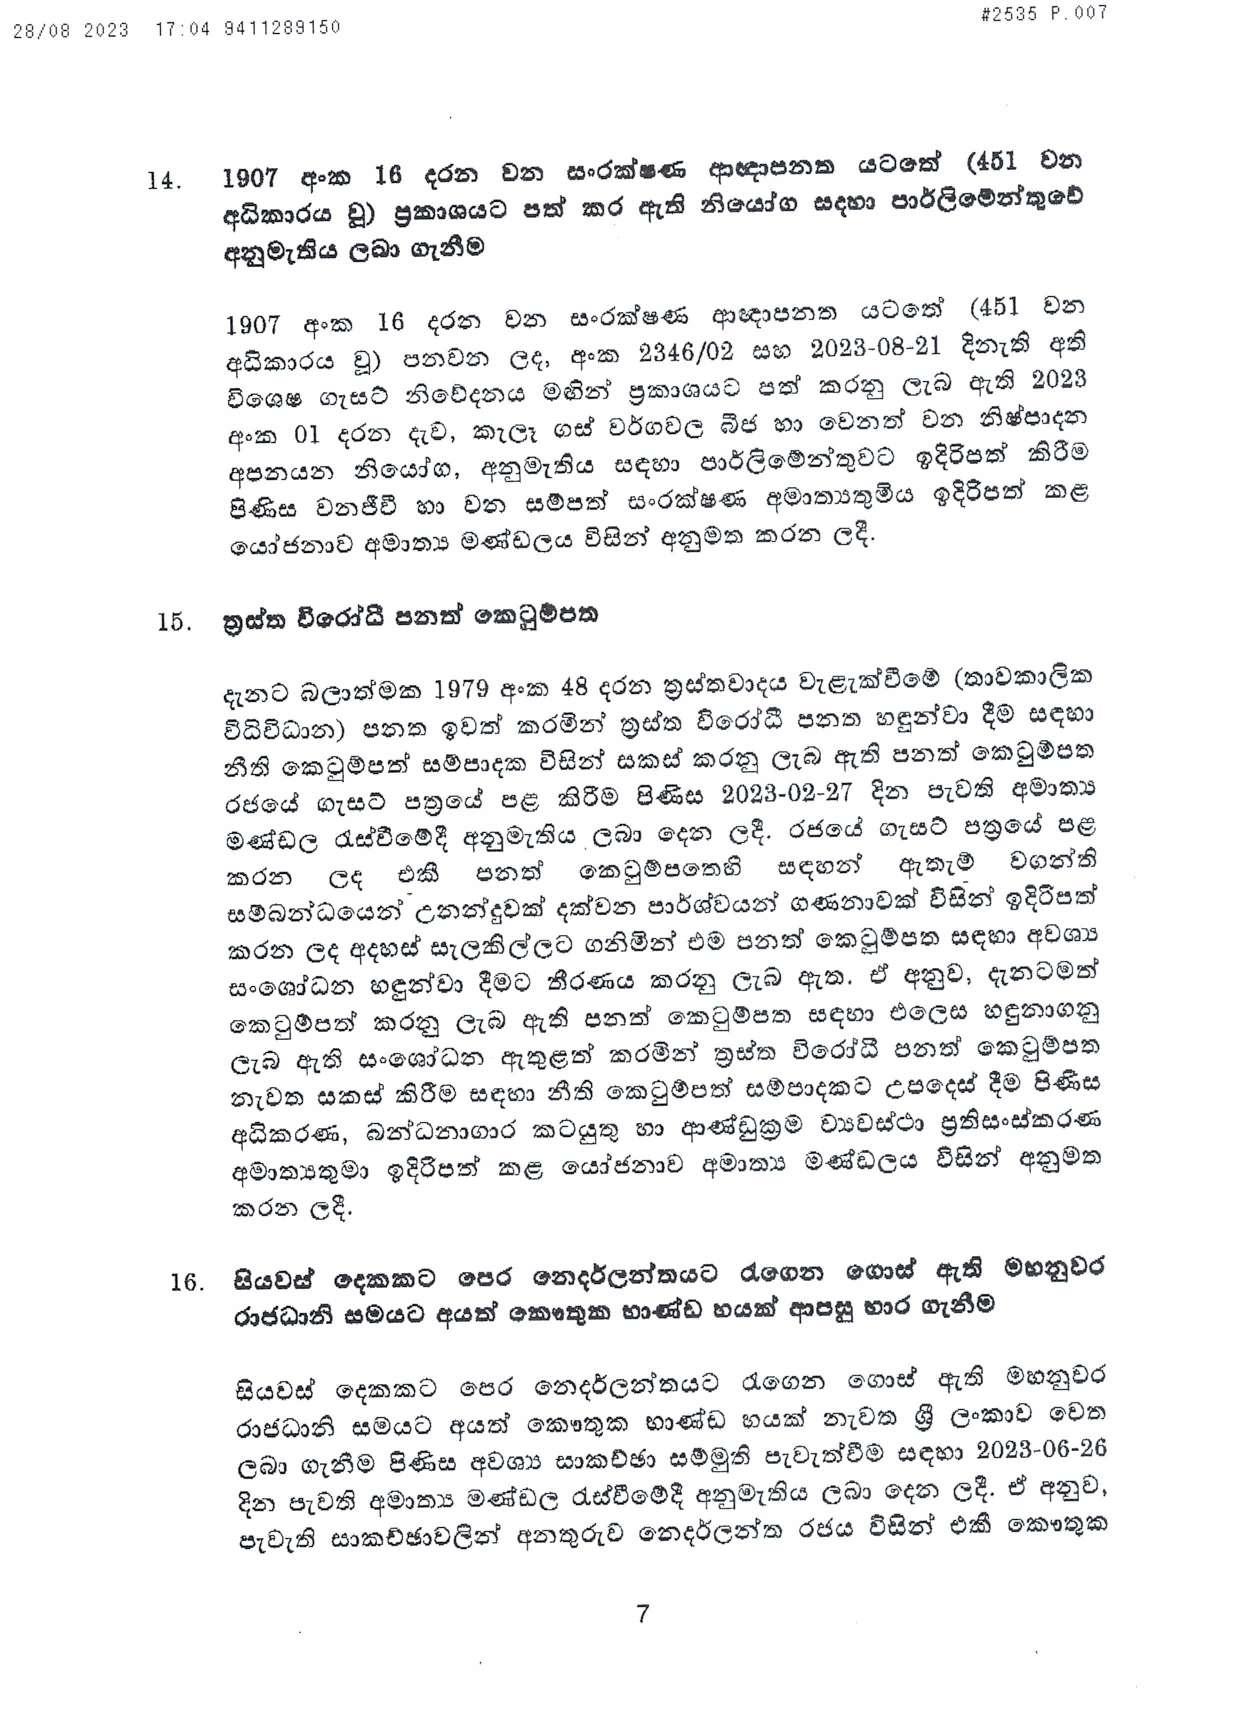 Cabinet Decision on 28.08.2023 1 page 007